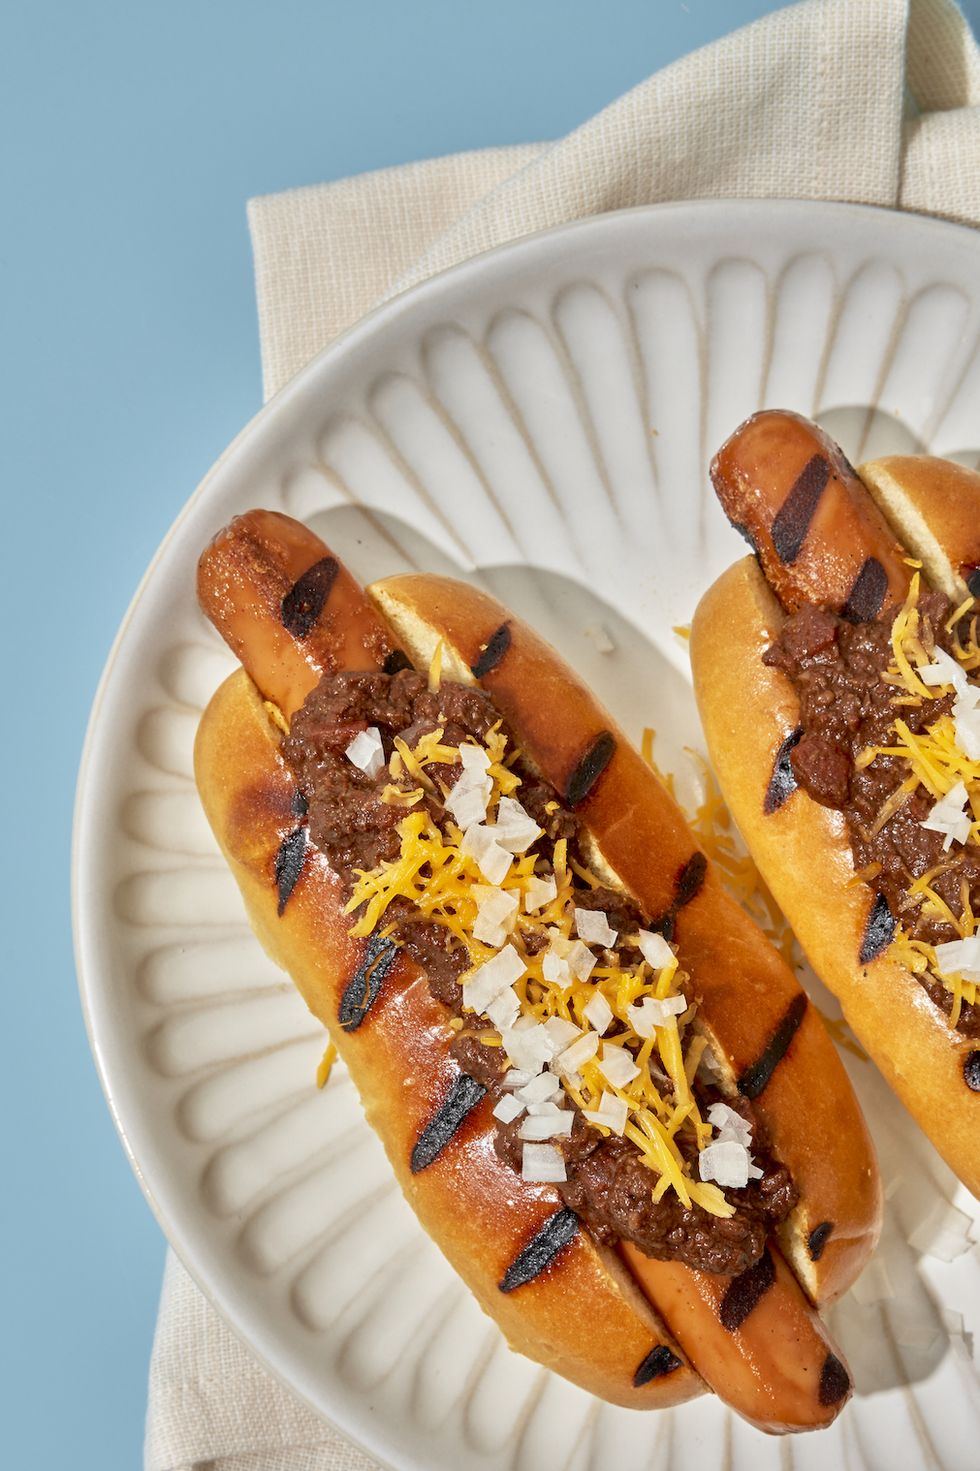 47 Best Hot Dog Recipes - Dogs For Ideas Easy Hot